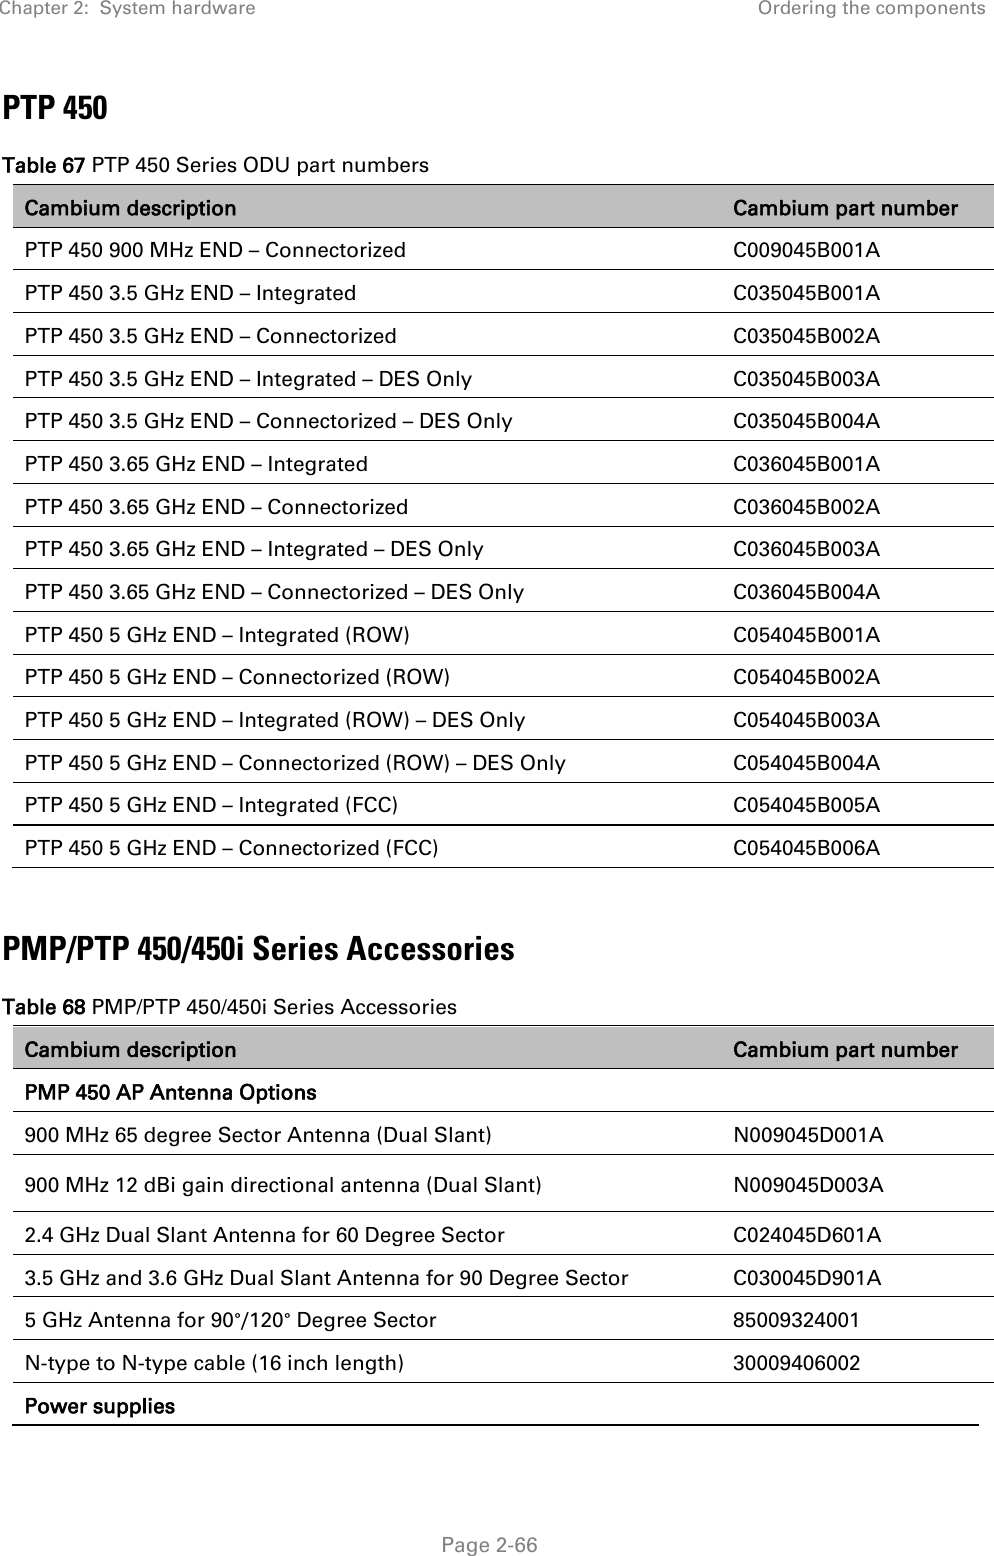 Chapter 2:  System hardware Ordering the components   Page 2-66 PTP 450 Table 67 PTP 450 Series ODU part numbers Cambium description Cambium part number PTP 450 900 MHz END – Connectorized  C009045B001A PTP 450 3.5 GHz END – Integrated C035045B001A PTP 450 3.5 GHz END – Connectorized  C035045B002A PTP 450 3.5 GHz END – Integrated – DES Only C035045B003A PTP 450 3.5 GHz END – Connectorized – DES Only C035045B004A PTP 450 3.65 GHz END – Integrated C036045B001A PTP 450 3.65 GHz END – Connectorized  C036045B002A PTP 450 3.65 GHz END – Integrated – DES Only C036045B003A PTP 450 3.65 GHz END – Connectorized – DES Only C036045B004A PTP 450 5 GHz END – Integrated (ROW) C054045B001A PTP 450 5 GHz END – Connectorized (ROW) C054045B002A PTP 450 5 GHz END – Integrated (ROW) – DES Only C054045B003A PTP 450 5 GHz END – Connectorized (ROW) – DES Only C054045B004A PTP 450 5 GHz END – Integrated (FCC) C054045B005A PTP 450 5 GHz END – Connectorized (FCC) C054045B006A  PMP/PTP 450/450i Series Accessories Table 68 PMP/PTP 450/450i Series Accessories Cambium description Cambium part number PMP 450 AP Antenna Options  900 MHz 65 degree Sector Antenna (Dual Slant) N009045D001A 900 MHz 12 dBi gain directional antenna (Dual Slant) N009045D003A 2.4 GHz Dual Slant Antenna for 60 Degree Sector C024045D601A 3.5 GHz and 3.6 GHz Dual Slant Antenna for 90 Degree Sector C030045D901A 5 GHz Antenna for 90°/120° Degree Sector 85009324001 N-type to N-type cable (16 inch length) 30009406002 Power supplies  